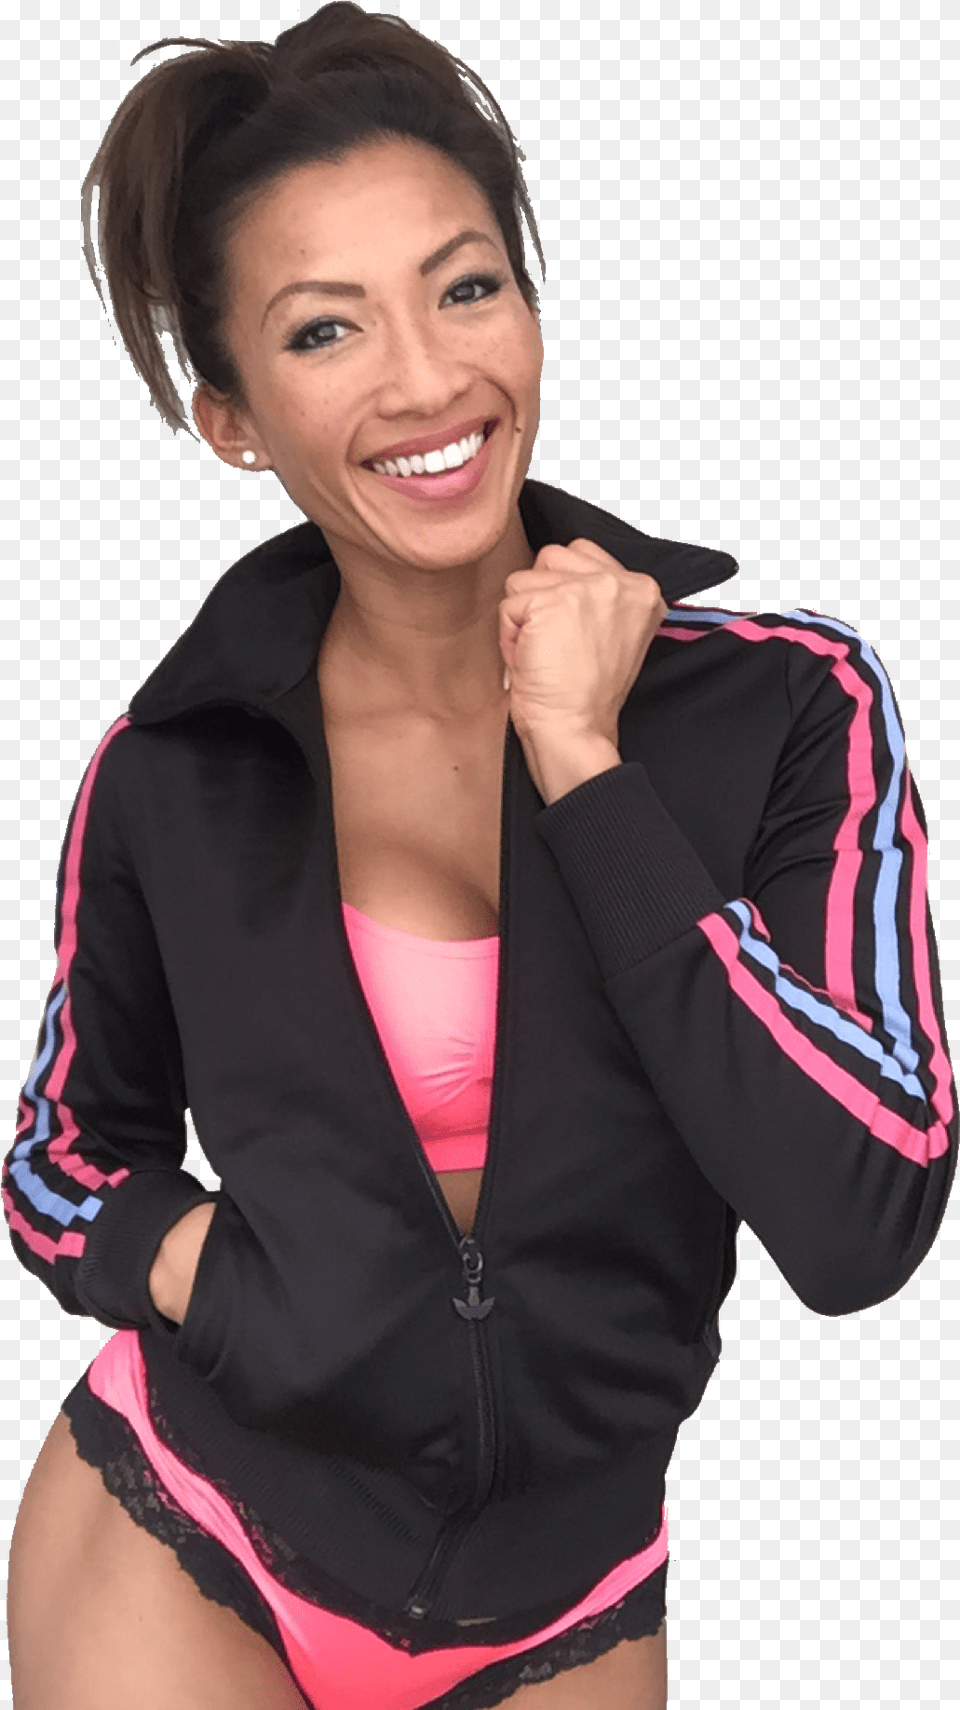 Penny Phang Fitness Travel Program Penny Phang, Adult, Smile, Sleeve, Person Png Image